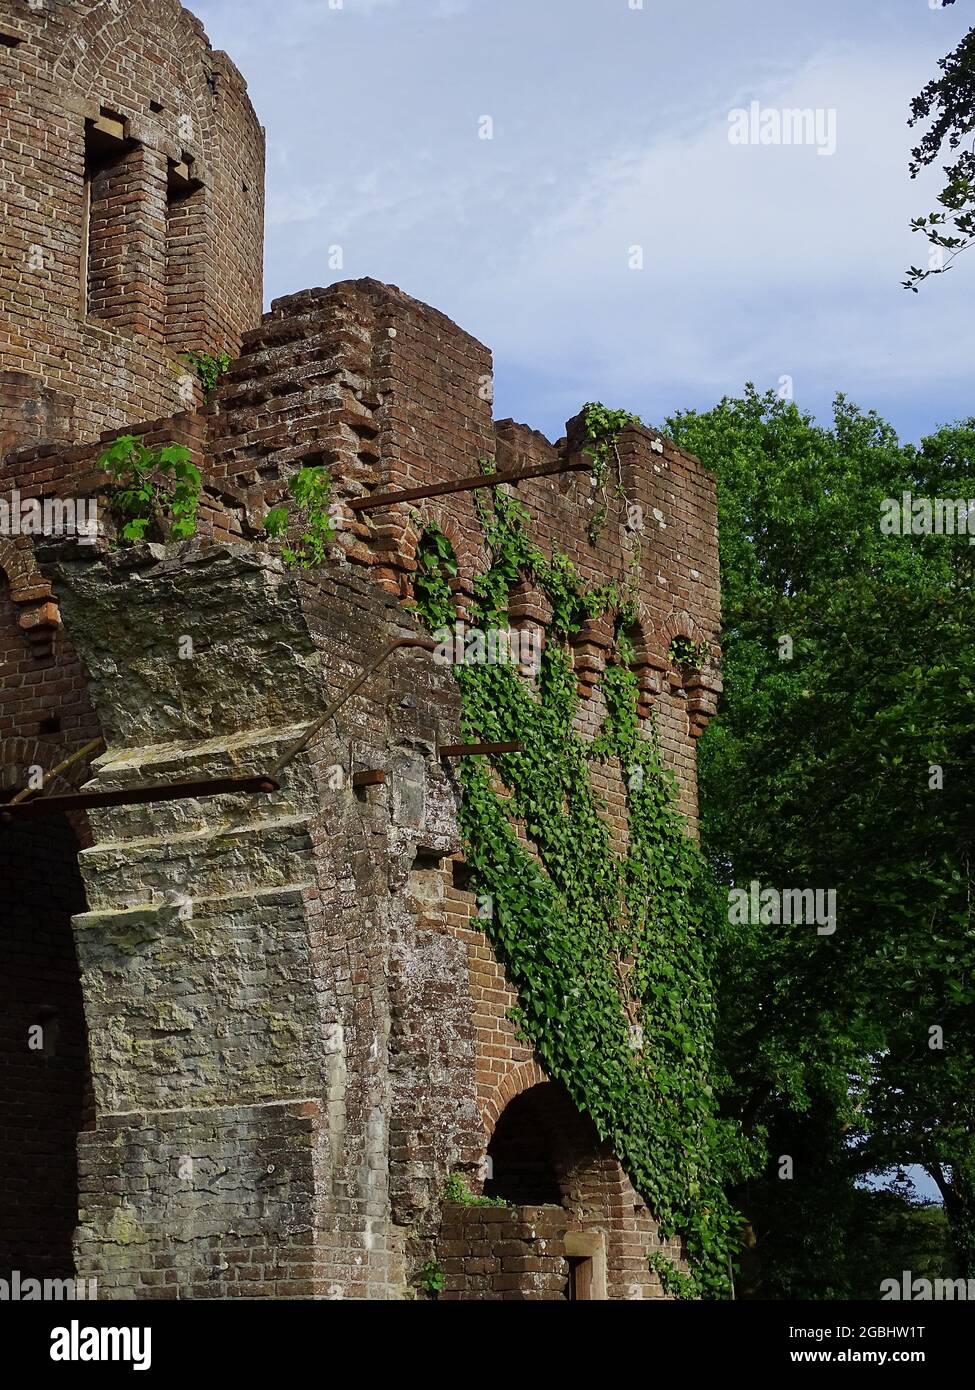 A folly (fake ruin) with an ivy against the old walls, grass in the foreground and a blue sky with clouds Stock Photo